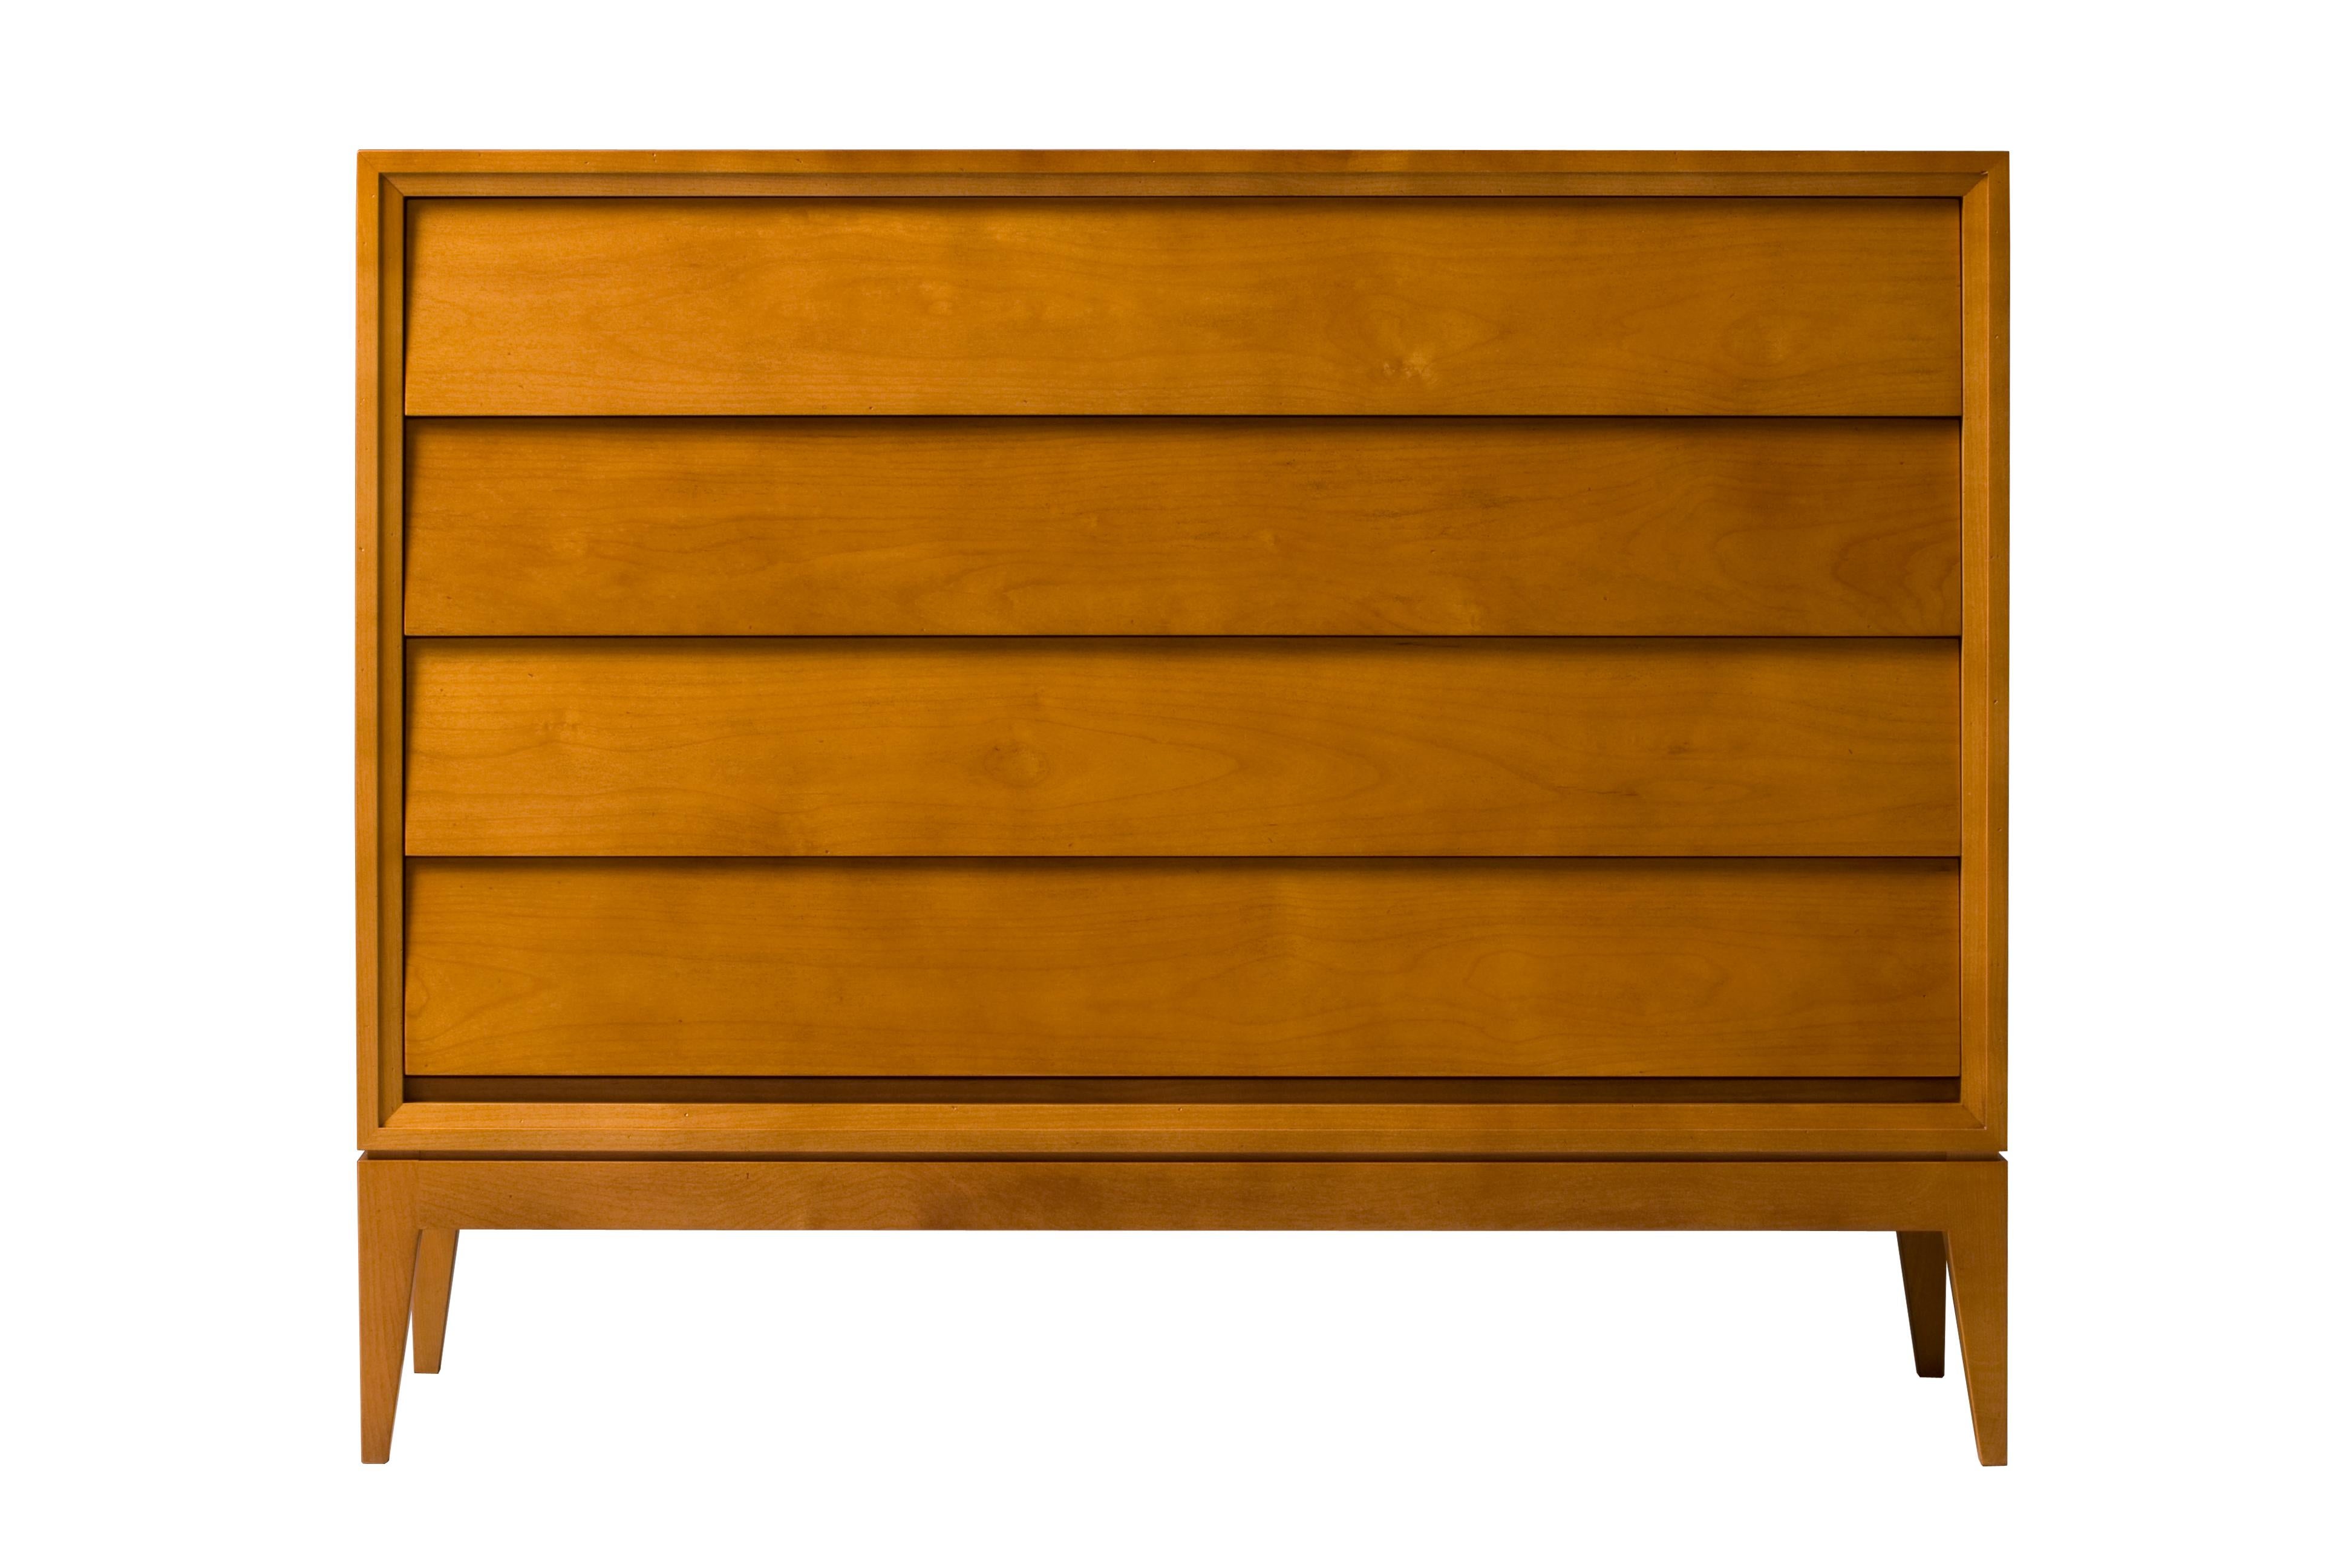 New York is a Mid-Century Modern style wooden chest of drawers, made of cherry wood with 4 drawers.
4 drawers with total extension lanes and dovetail joints. 
customizable with different wood finishes
made in italy by Morelato.